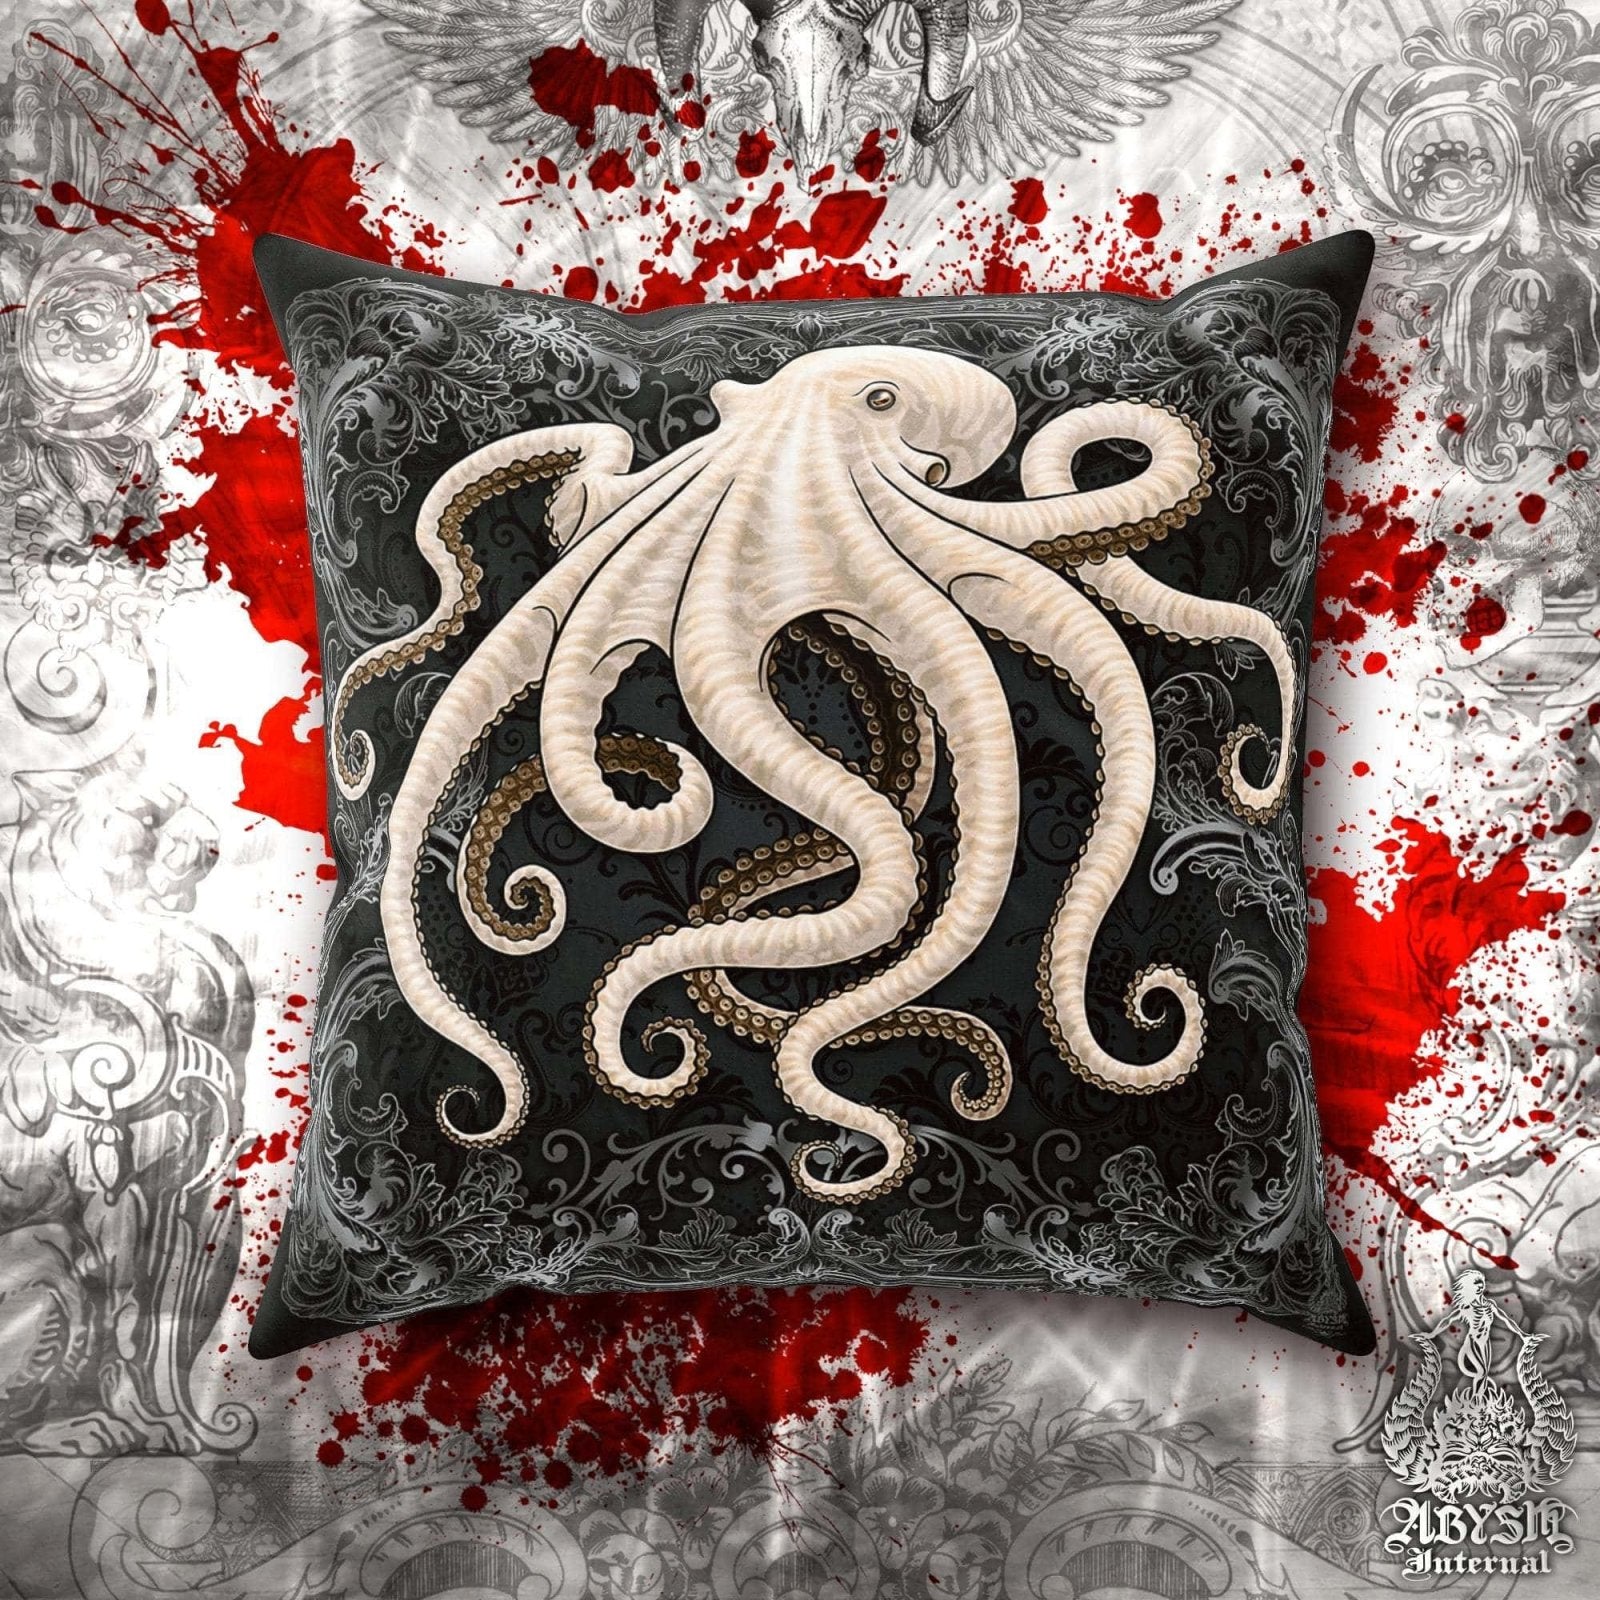 Alternative Throw Pillow, Decorative Accent Cushion, Beach Home Decor, Indie and Eclectic Design - Black & White Octopus - Abysm Internal